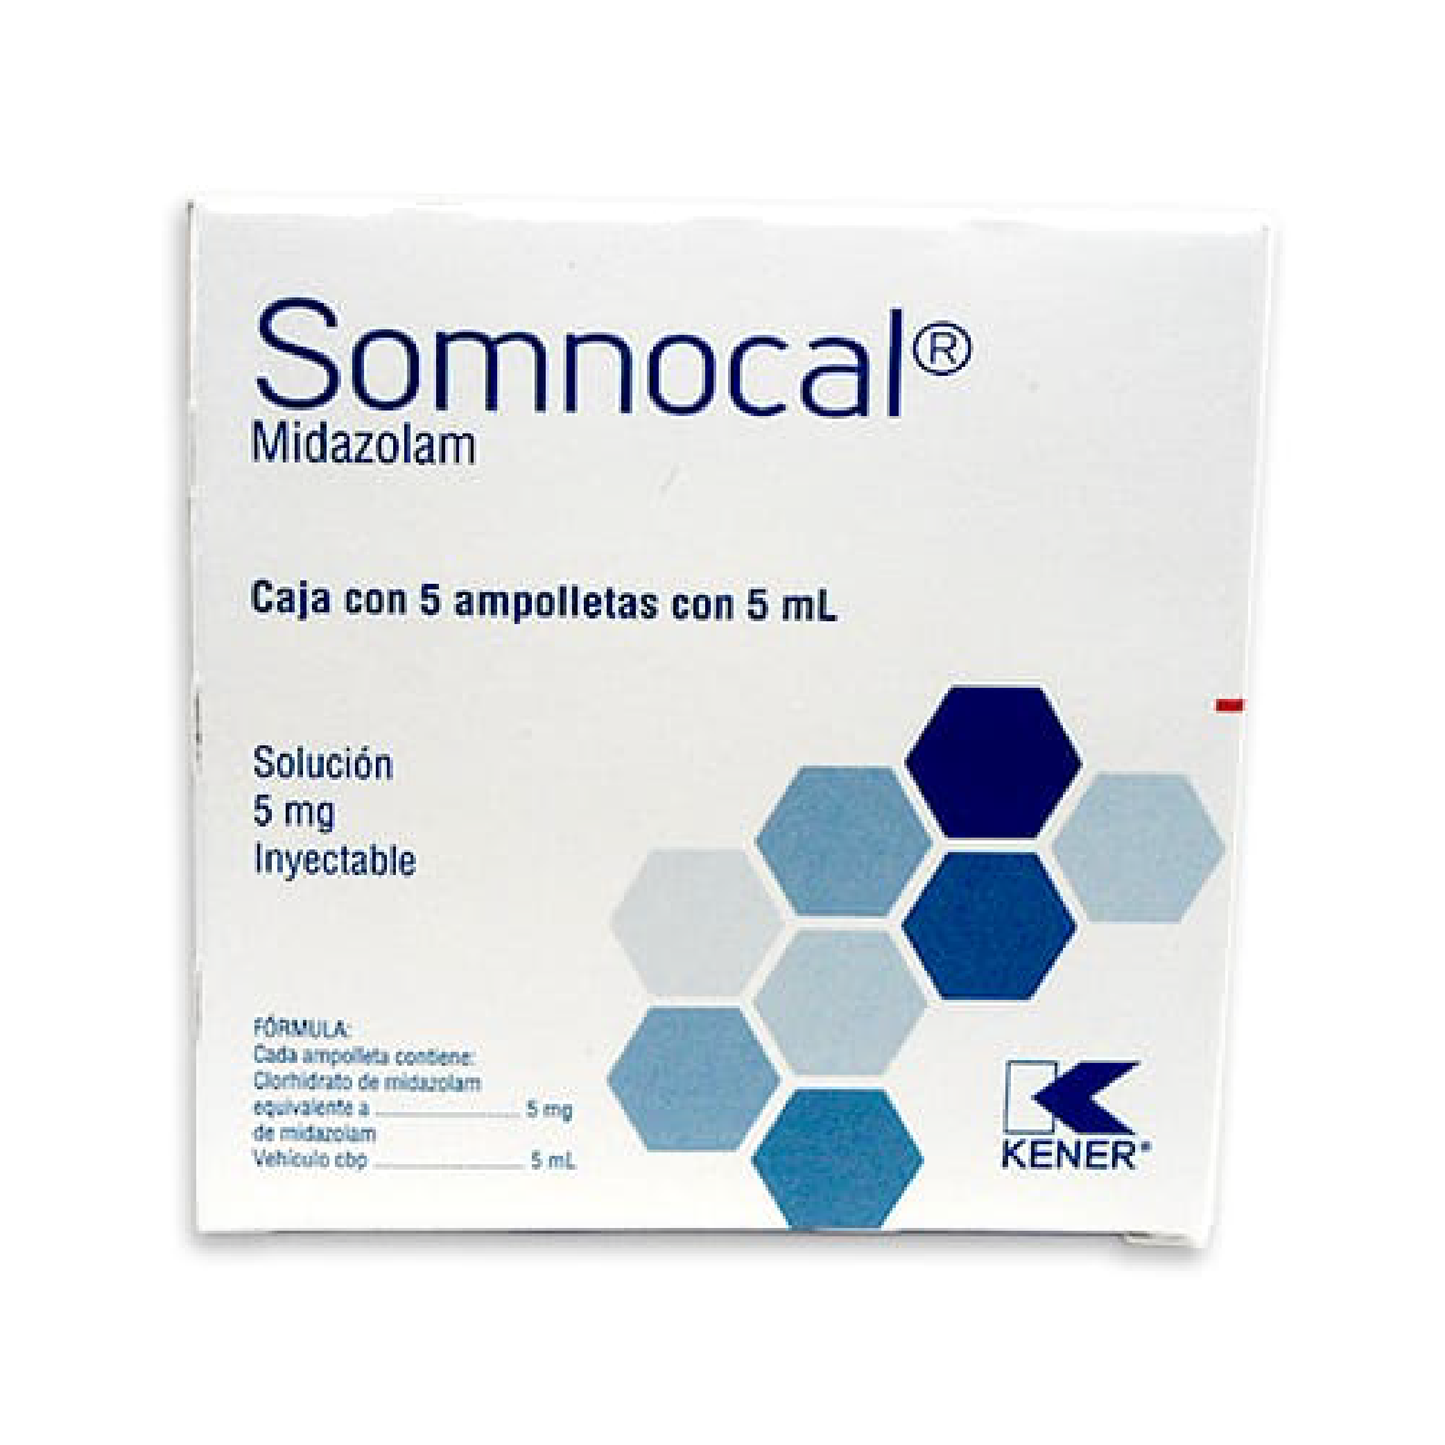 Somnocal (Midazolam) Sol iny 5mg Cja c/5 amps 5ml